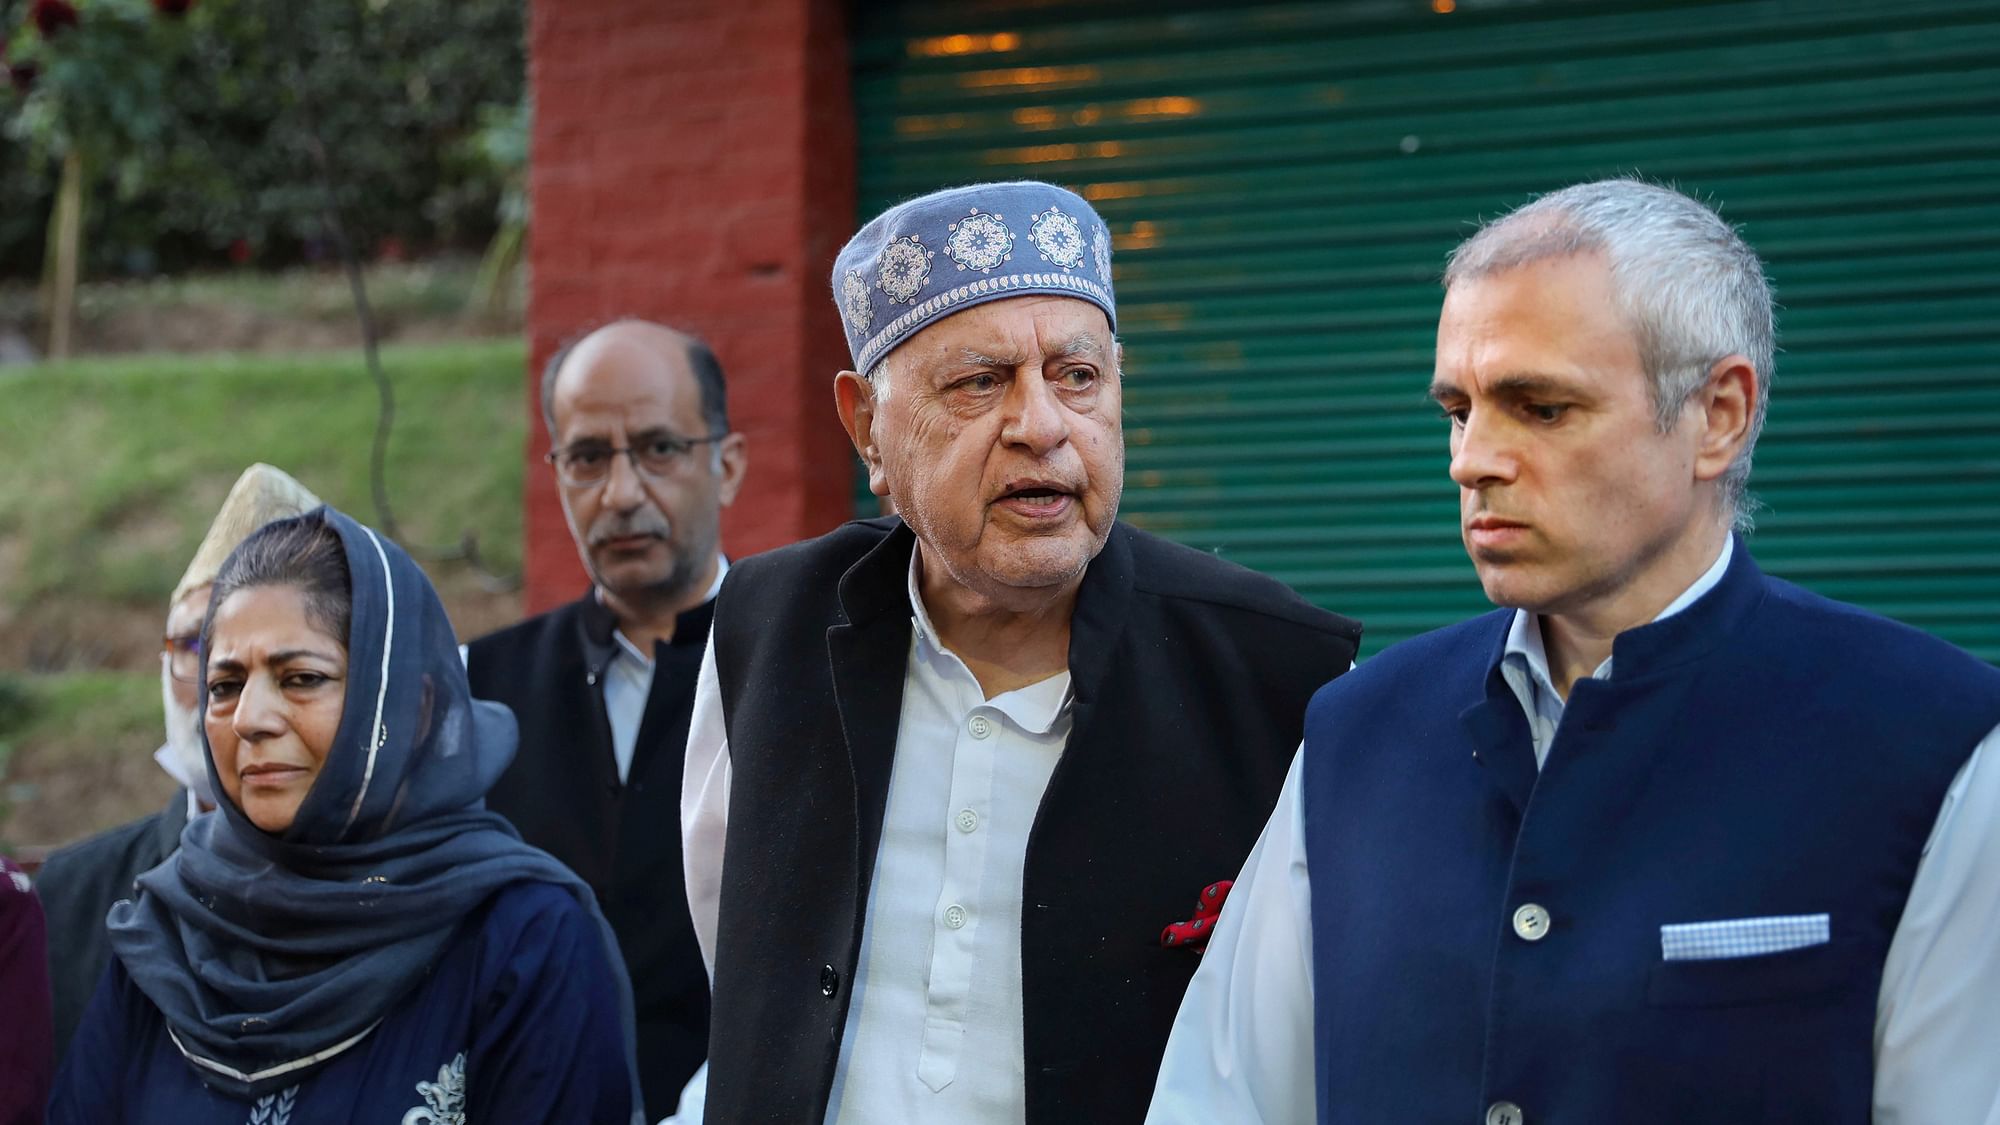 <div class="paragraphs"><p> Farooq Abdullah addresses a press conference along with his son Omar Abdullah, Peoples Democratic Party (PDP) President Mehbooba Mufti and others after meeting of signatories to the Gupkar declaration, at his residence in Srinagar, Thursday, 15 October, 2020.</p><p>Image used for representational purposes only.&nbsp;</p><p> </p></div>